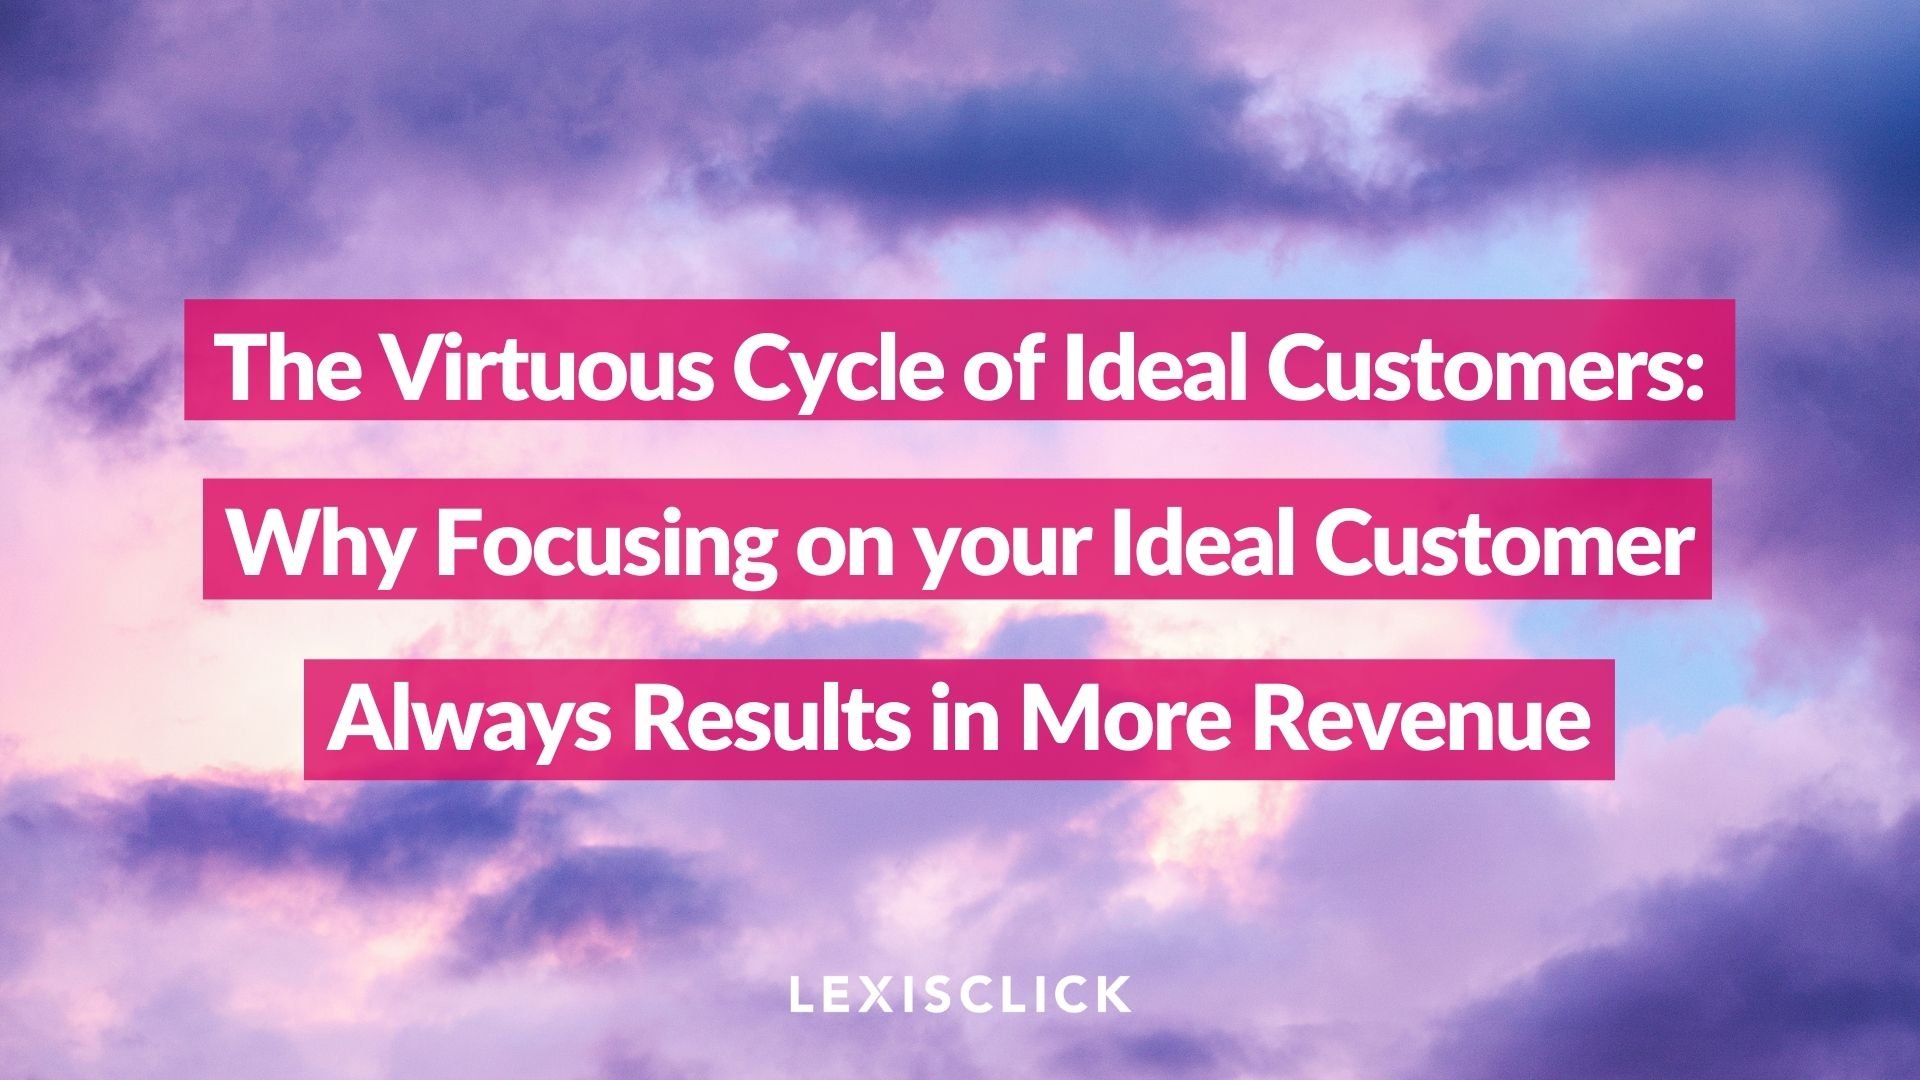 The Virtuous Cycle of Ideal Customers:Why Focusing on your Ideal Customer Always Results in More Revenue